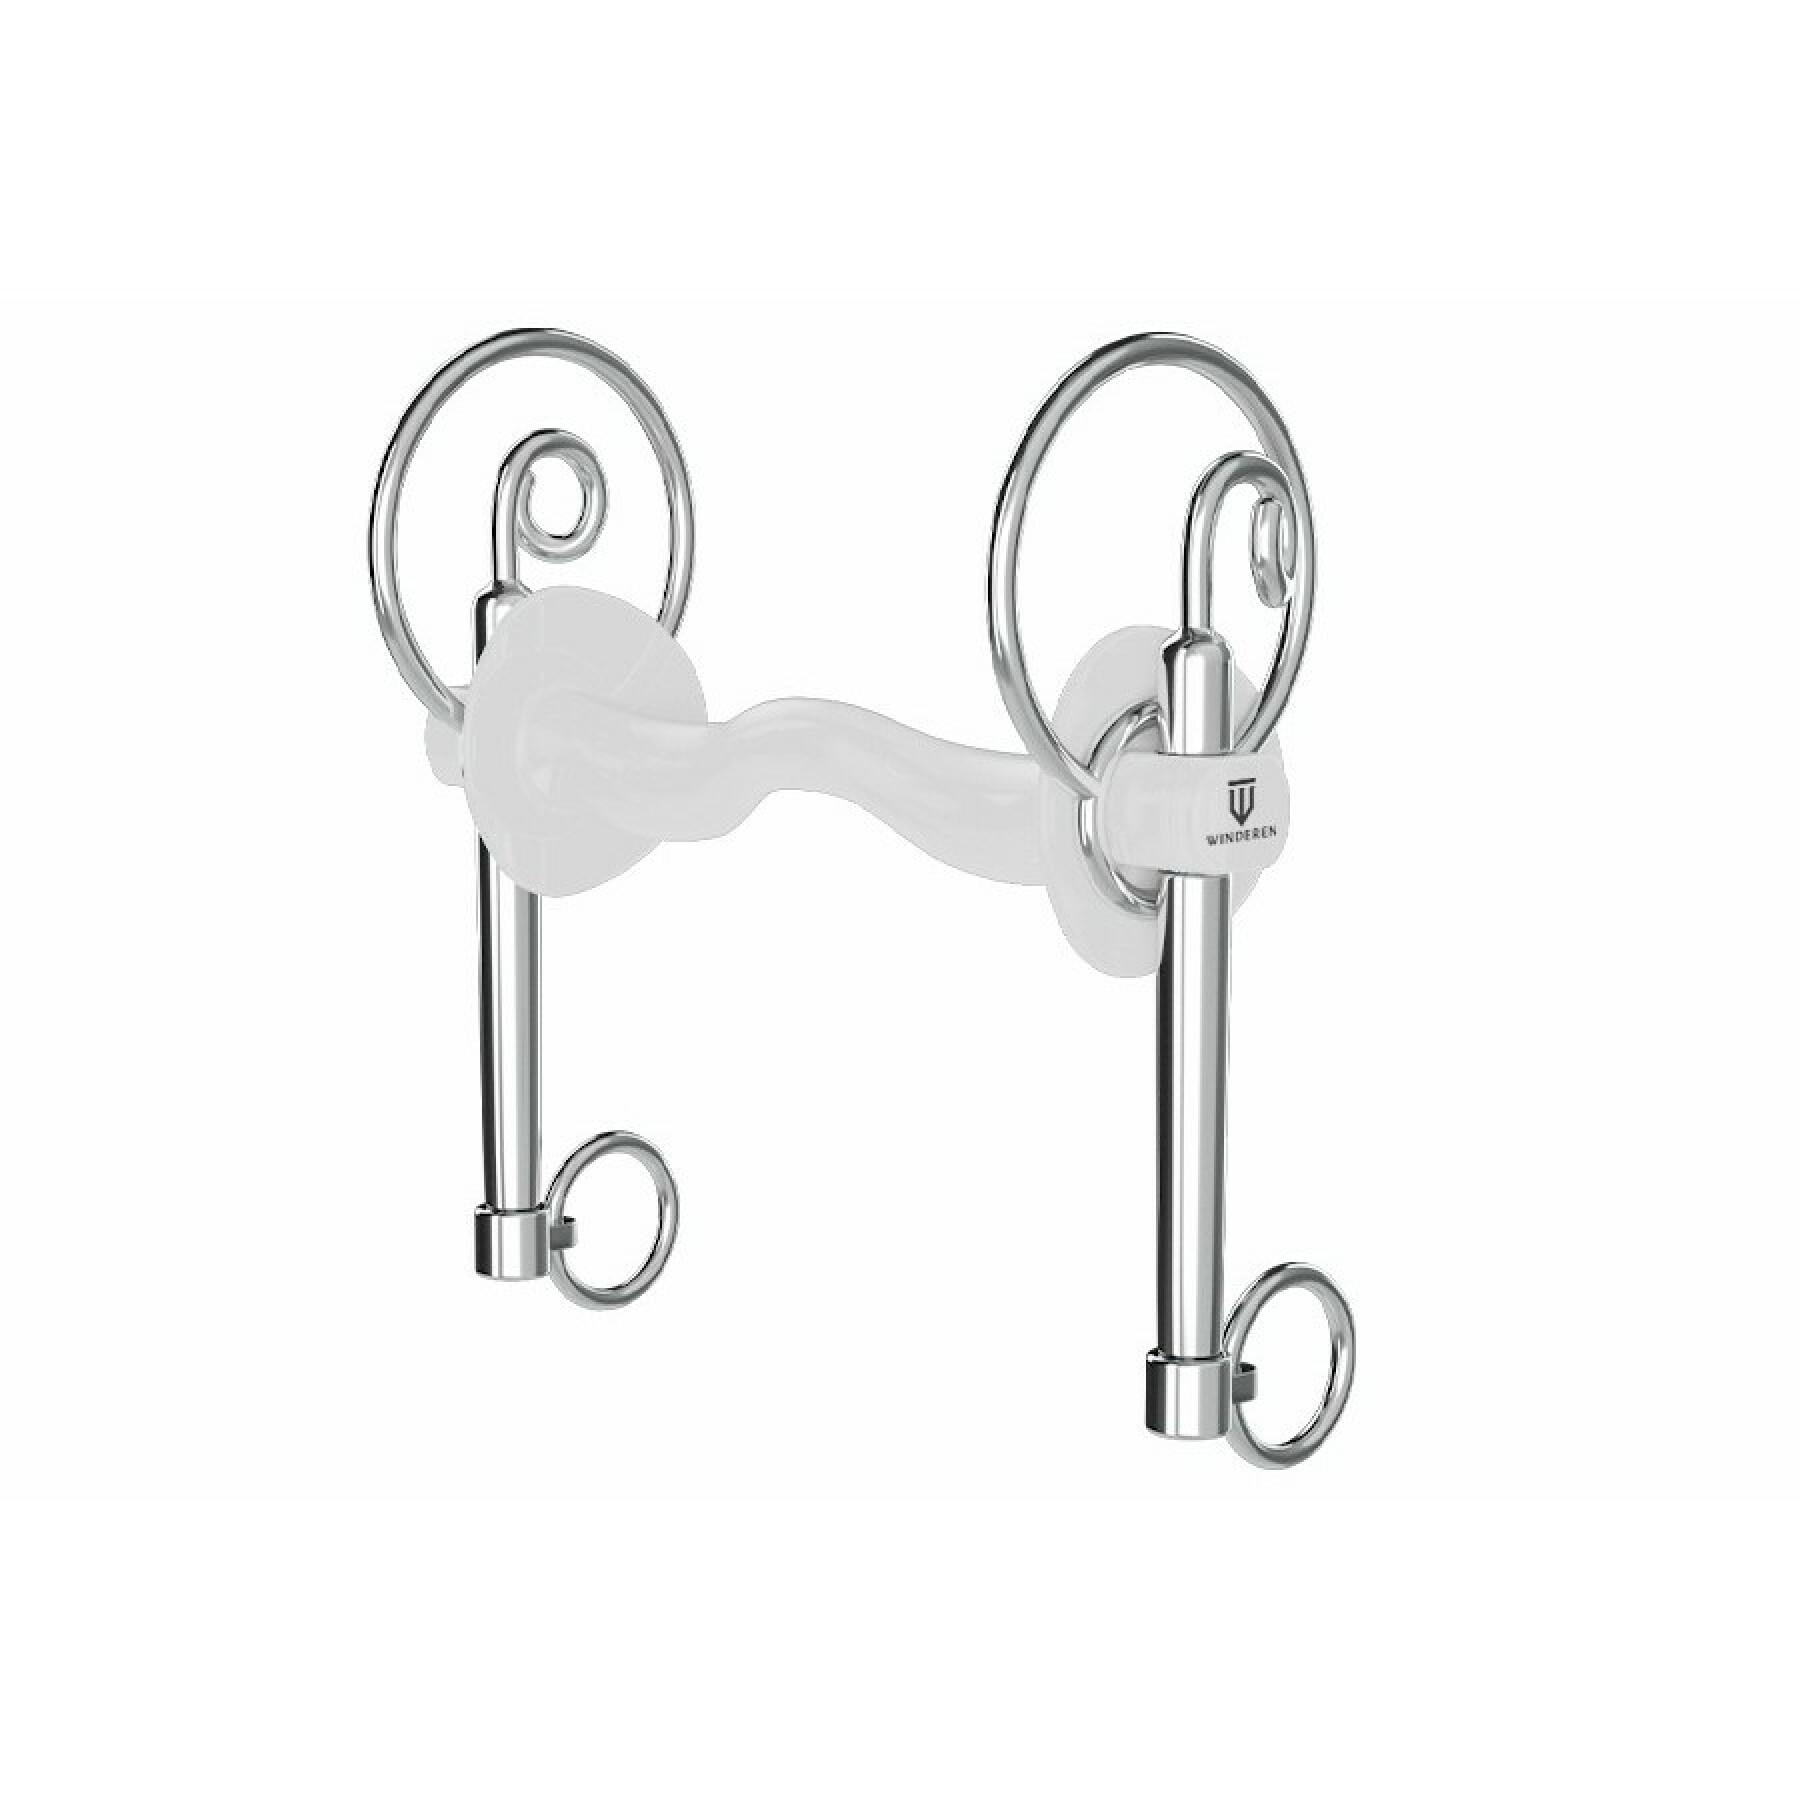 Bit swales for horses with long legs and straight barrel with tongue hole and washers Winderen Swales